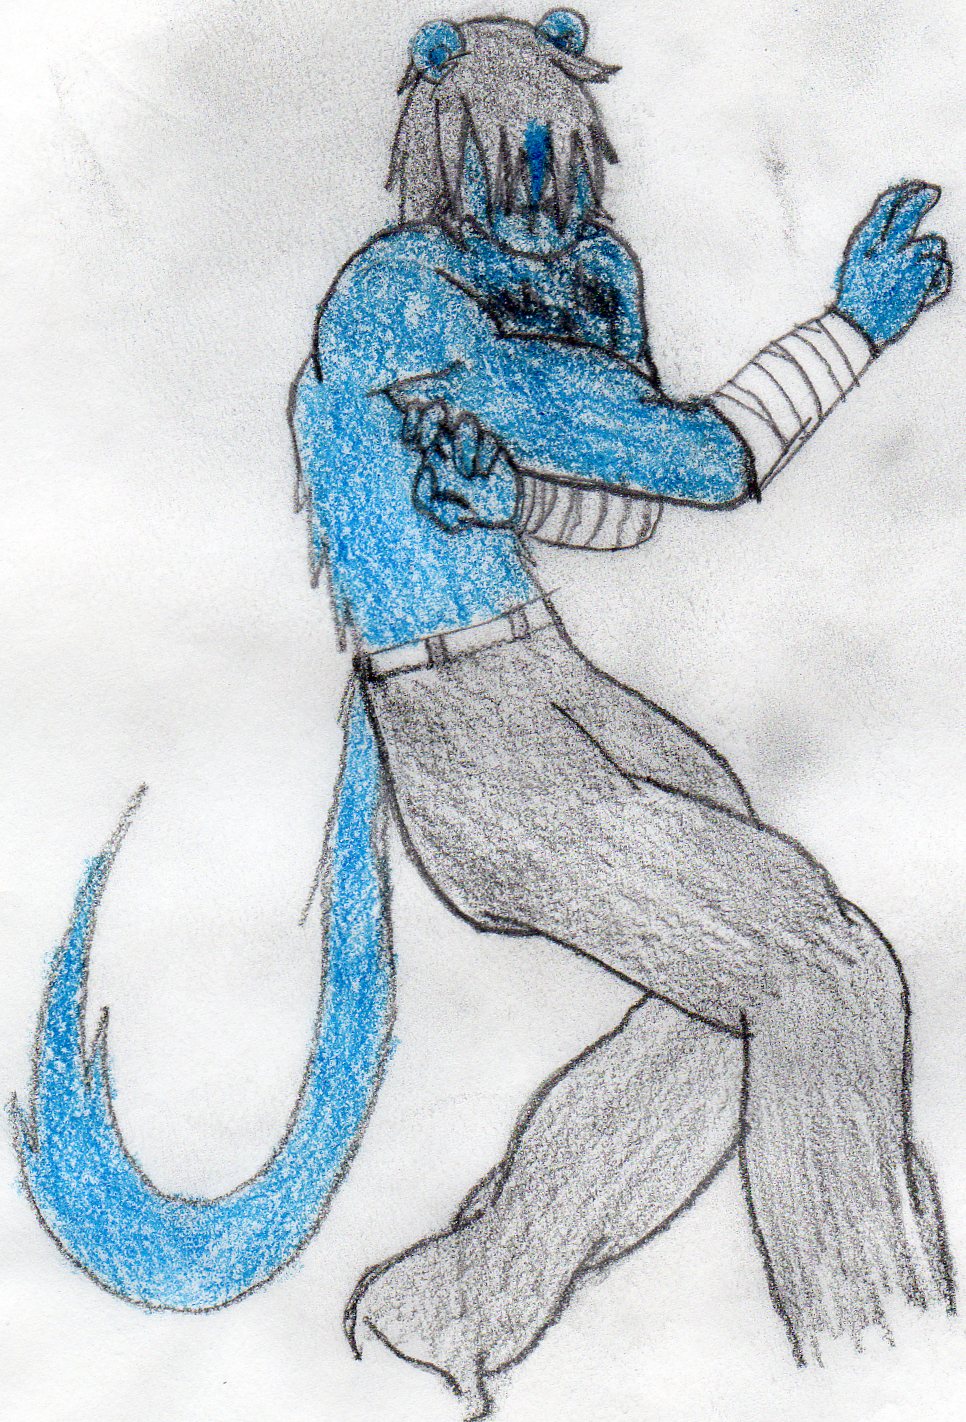 Kage The Ferret(Soul's Dad) by TailsLover80